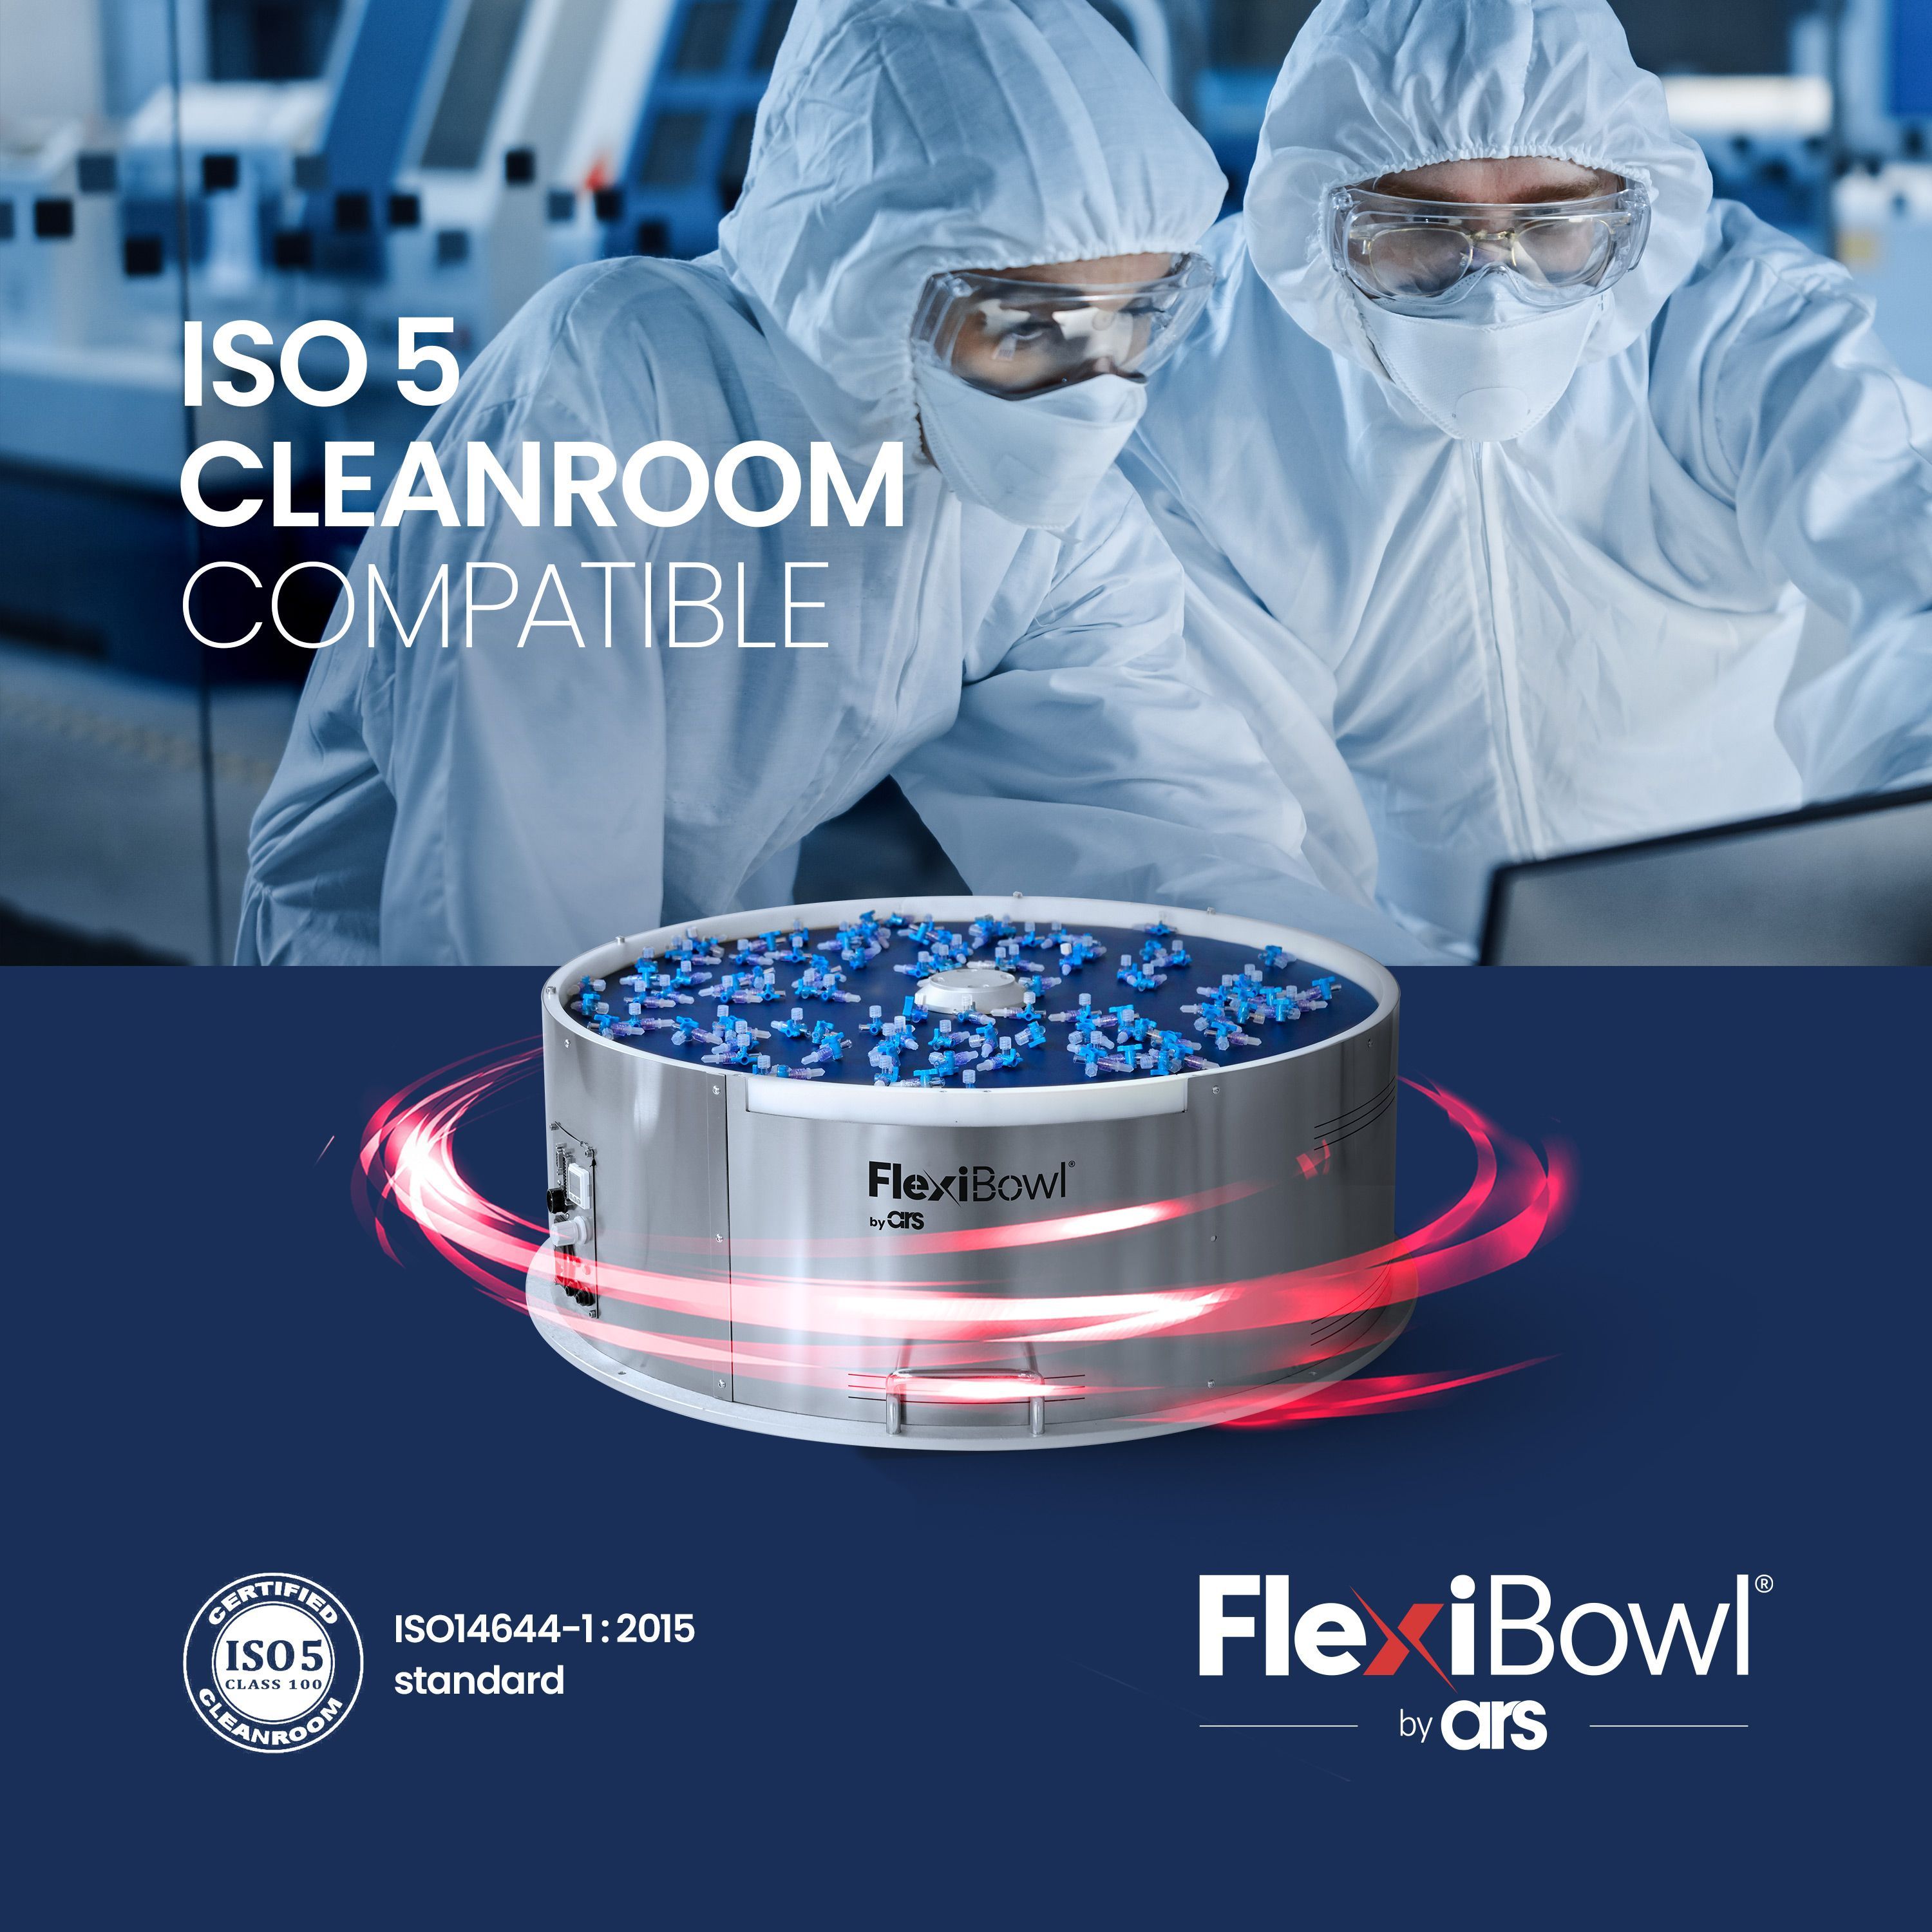 FlexiBowl®: ISO 5 Compatible Solution for Cleanroom Settings